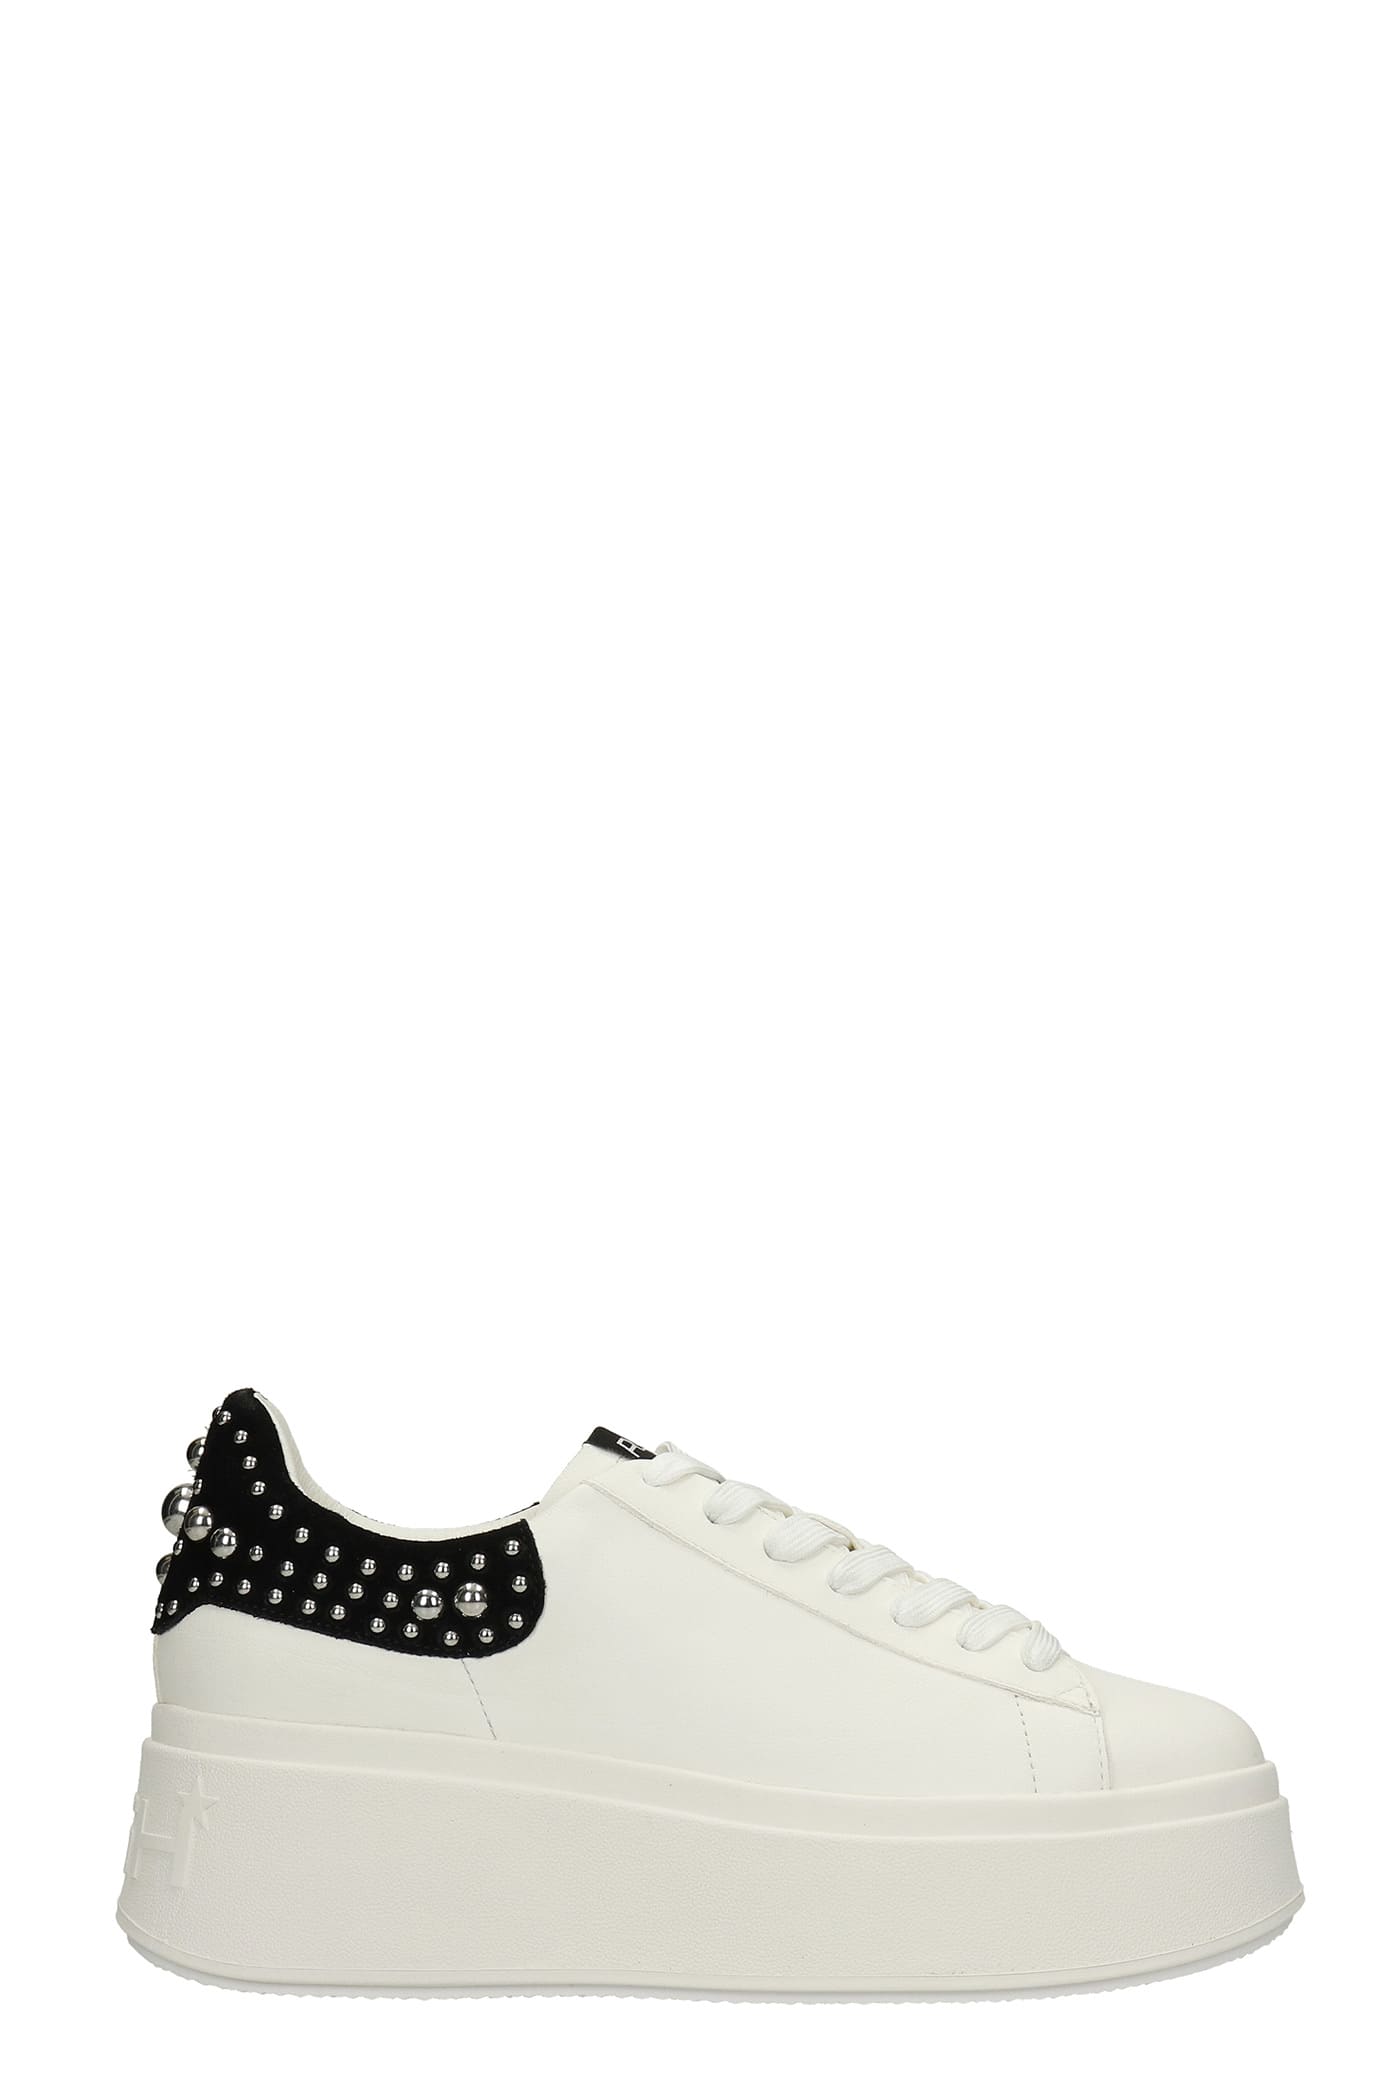 Ash Mobystuds Sneakers In White Leather